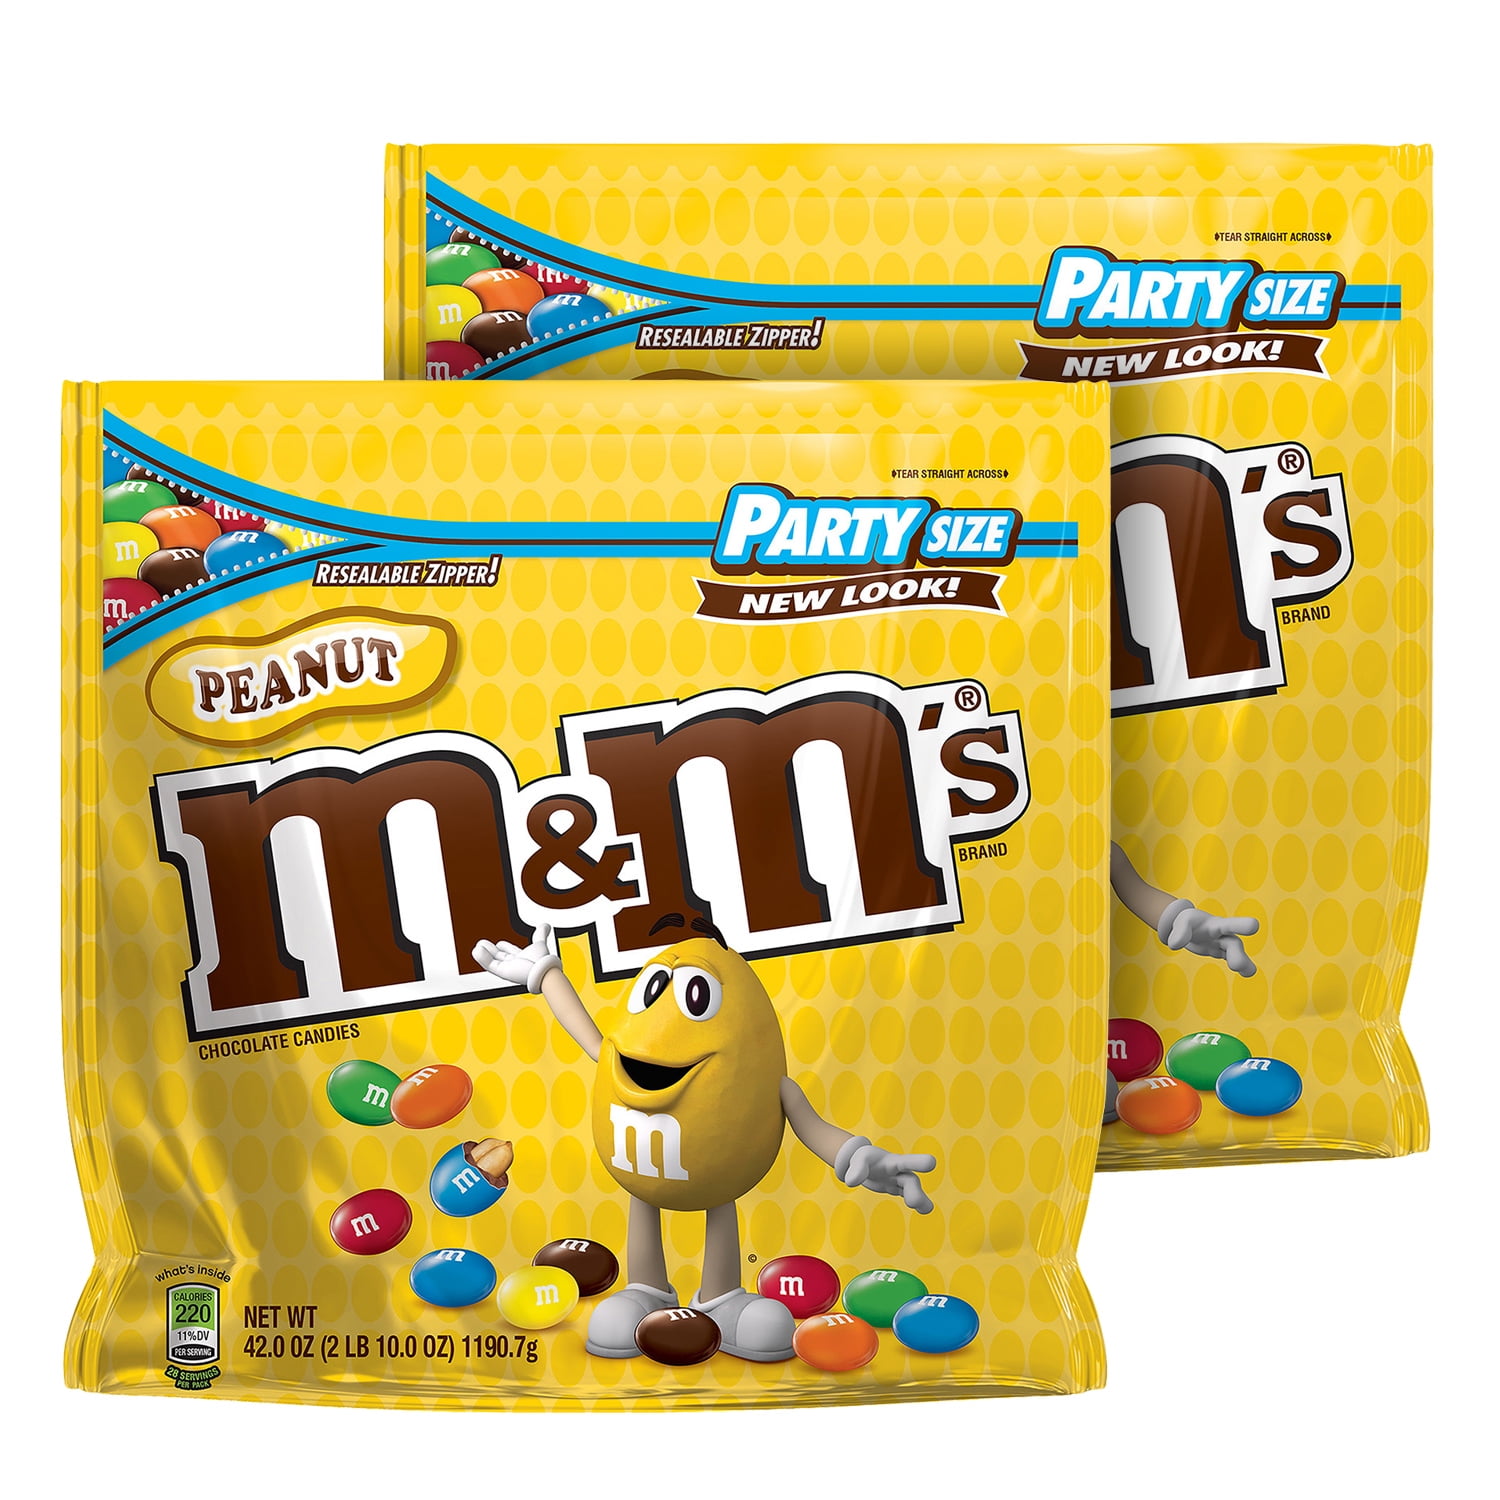 Pick 2 M&M's Sharing Size Resealable Chocolate Candies Bags: Peanut  Butter Minis